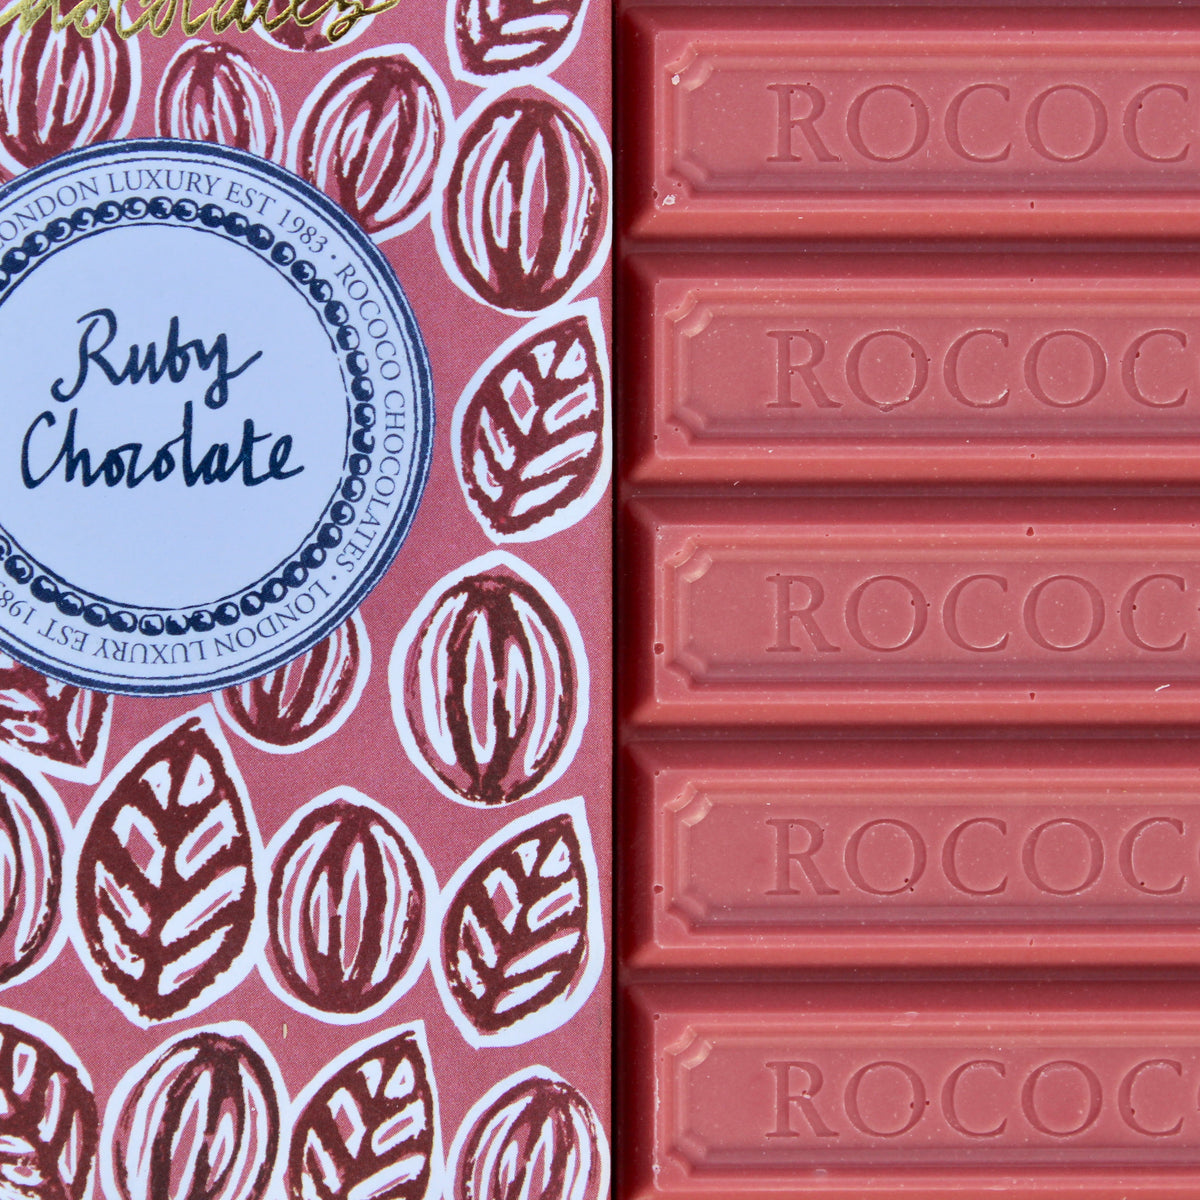 Ruby chocolate - A true gift from nature